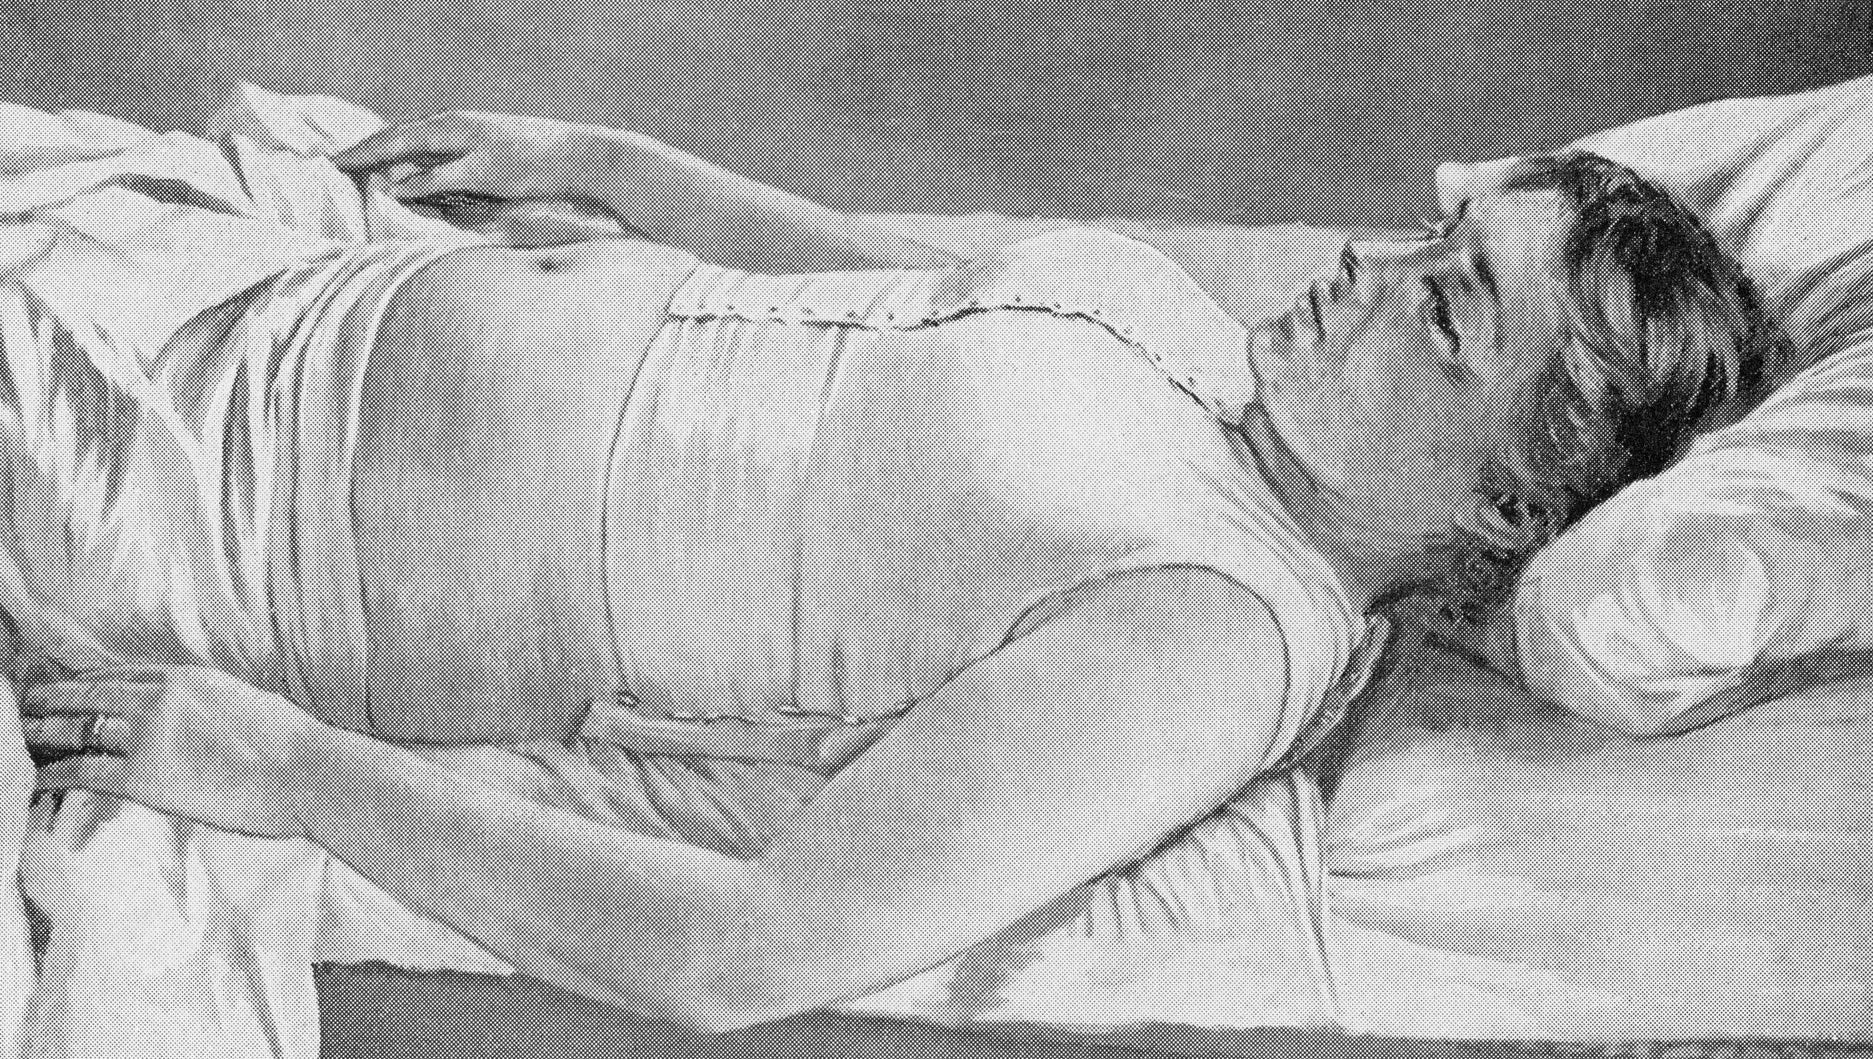 Antique Illustration of a pregnant woman in bed